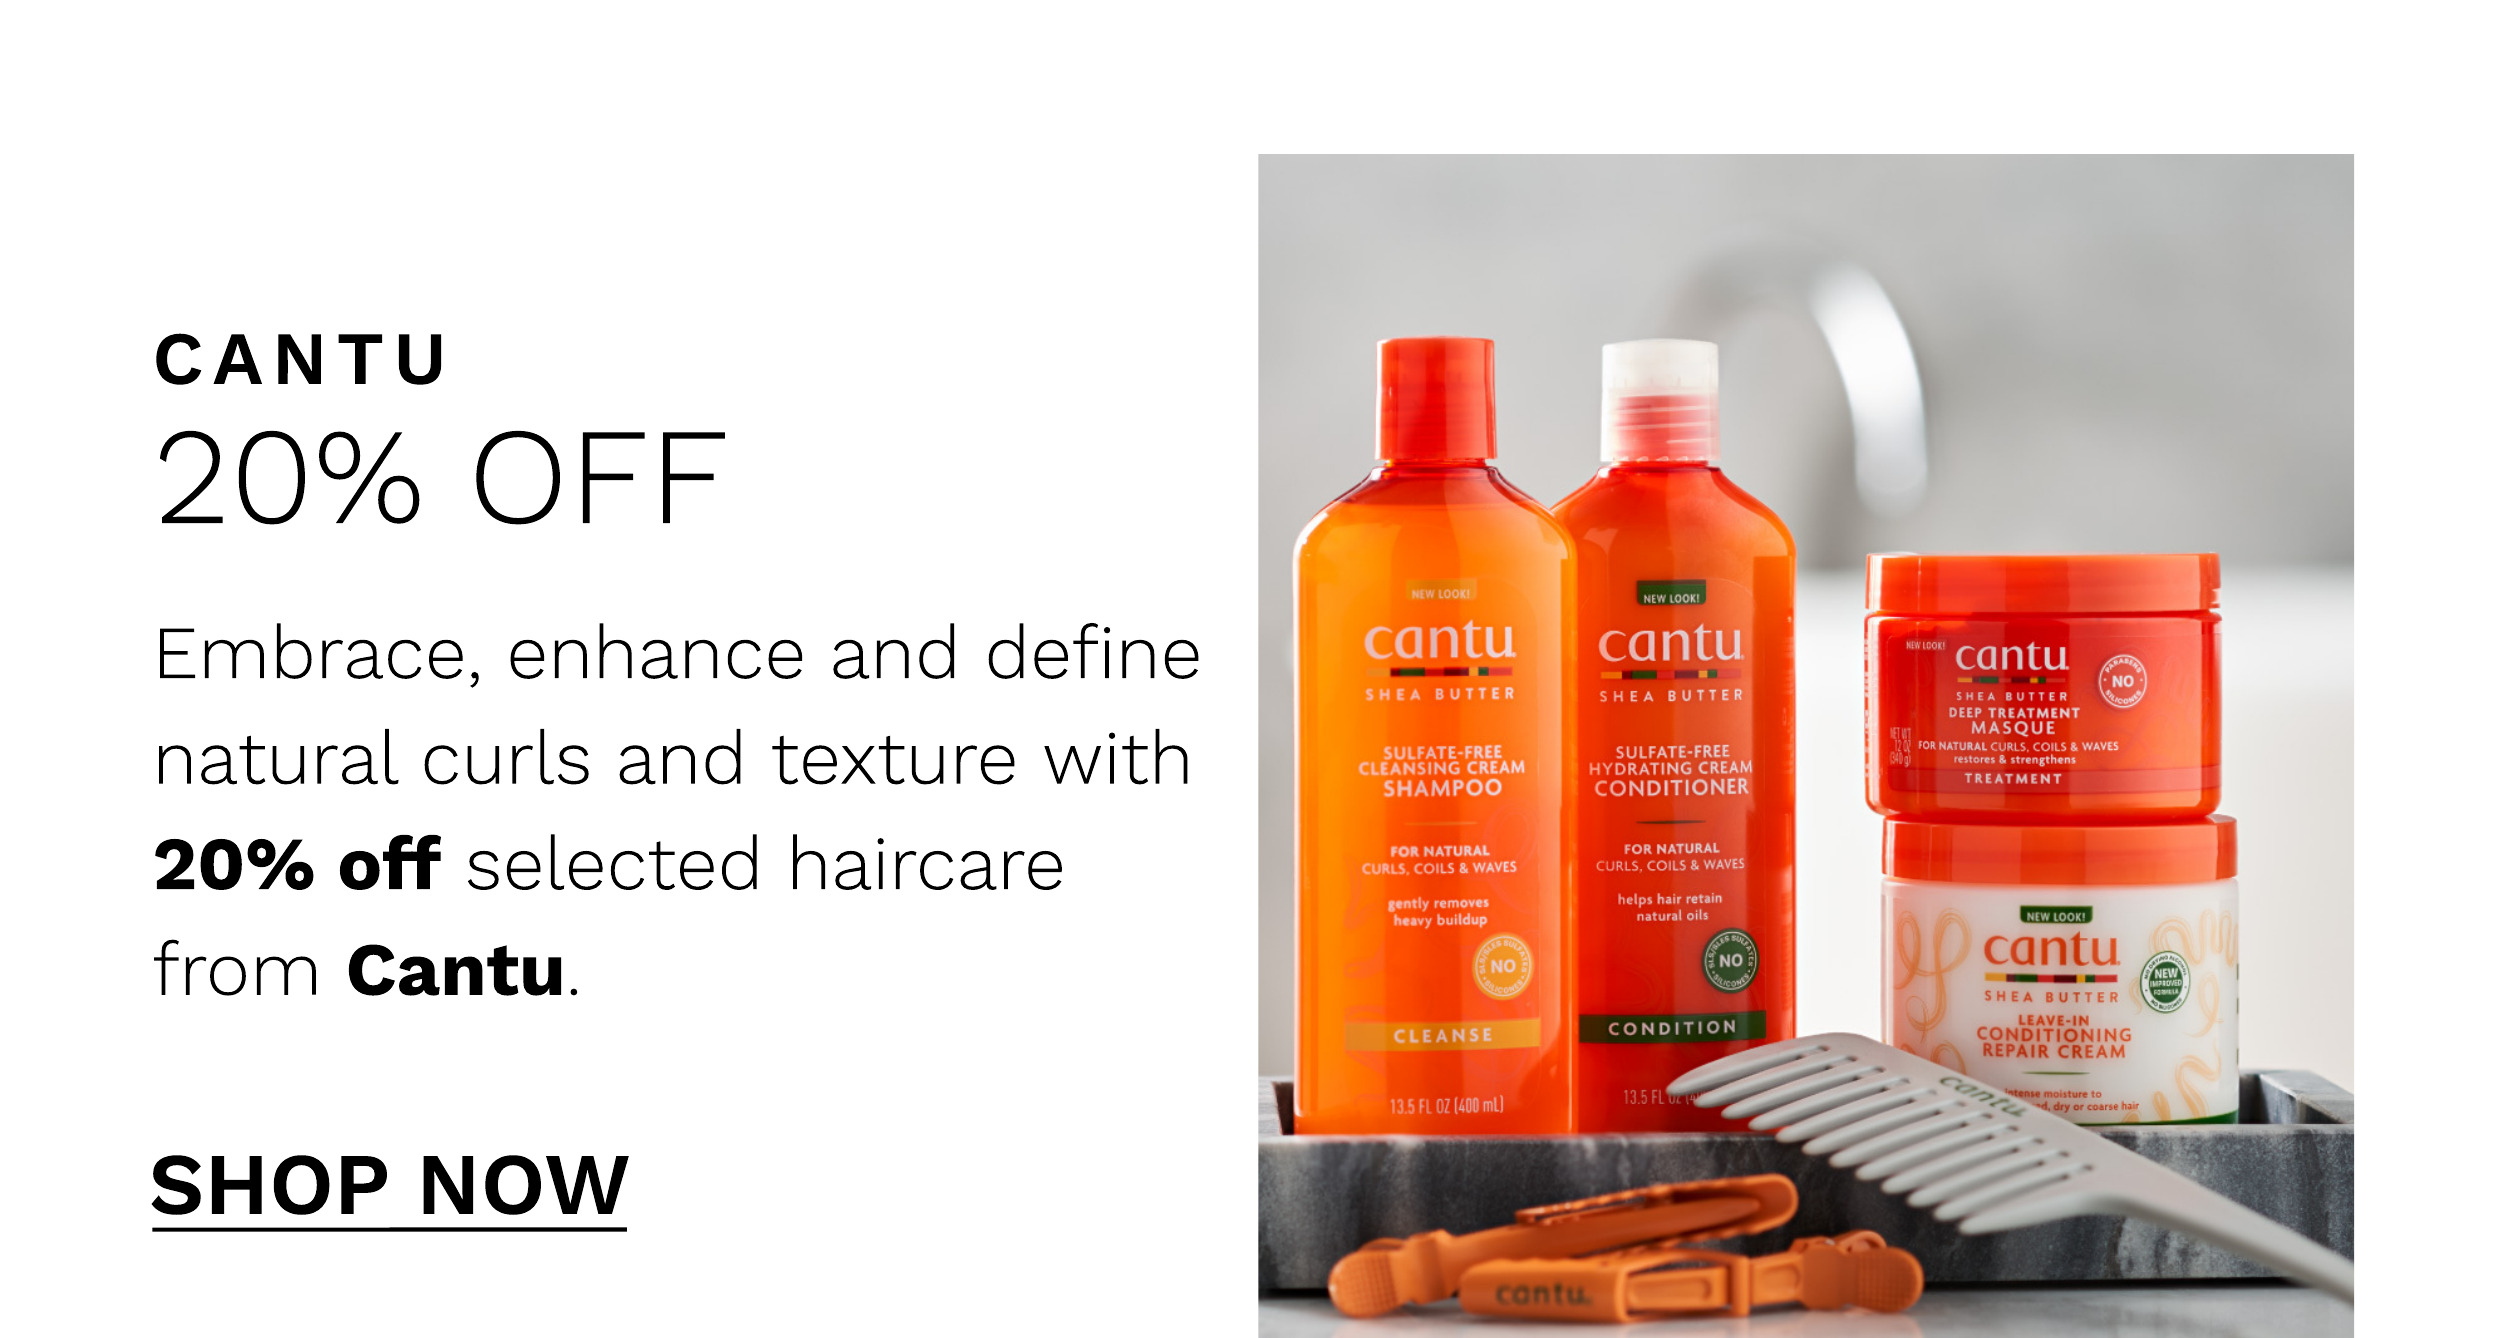 CANTU 20% OFF Embrace, enhance and define onti fw natural curls and texture with 20% off selected haircare from Cantu. SHOP NOW 